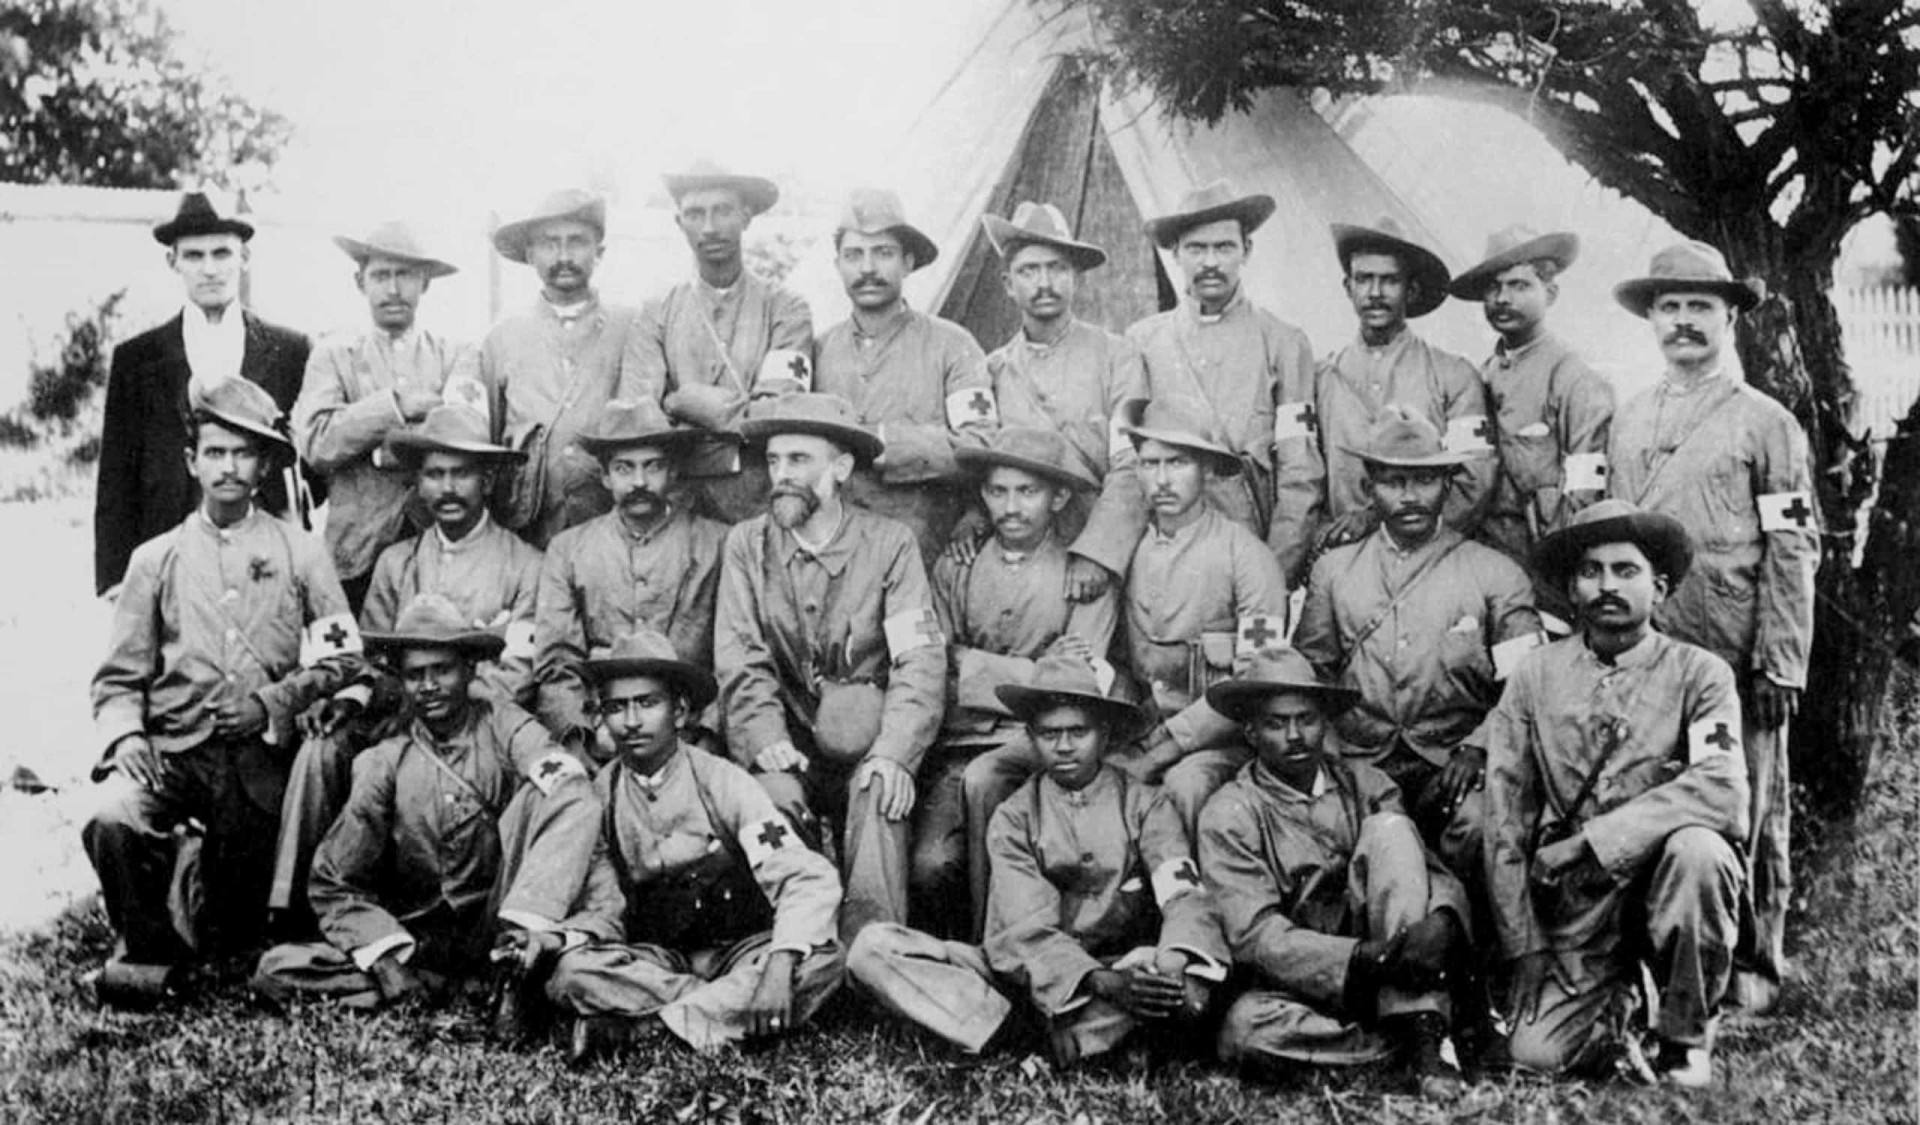 <p>During the Boer War (1899–1902), Gandhi volunteered to form a group of stretcher-bearers as the Natal Indian Ambulance Corps. He eventually raised 1,100 Indian volunteers to support British combat troops against the Boers. He's pictured here with colleagues (middle row, fifth from left) in 1900. </p><p>You may also like:<a href="https://www.starsinsider.com/n/278365?utm_source=msn.com&utm_medium=display&utm_campaign=referral_description&utm_content=447666v5en-us"> Endangered foods that may soon disappear from our planet</a></p>